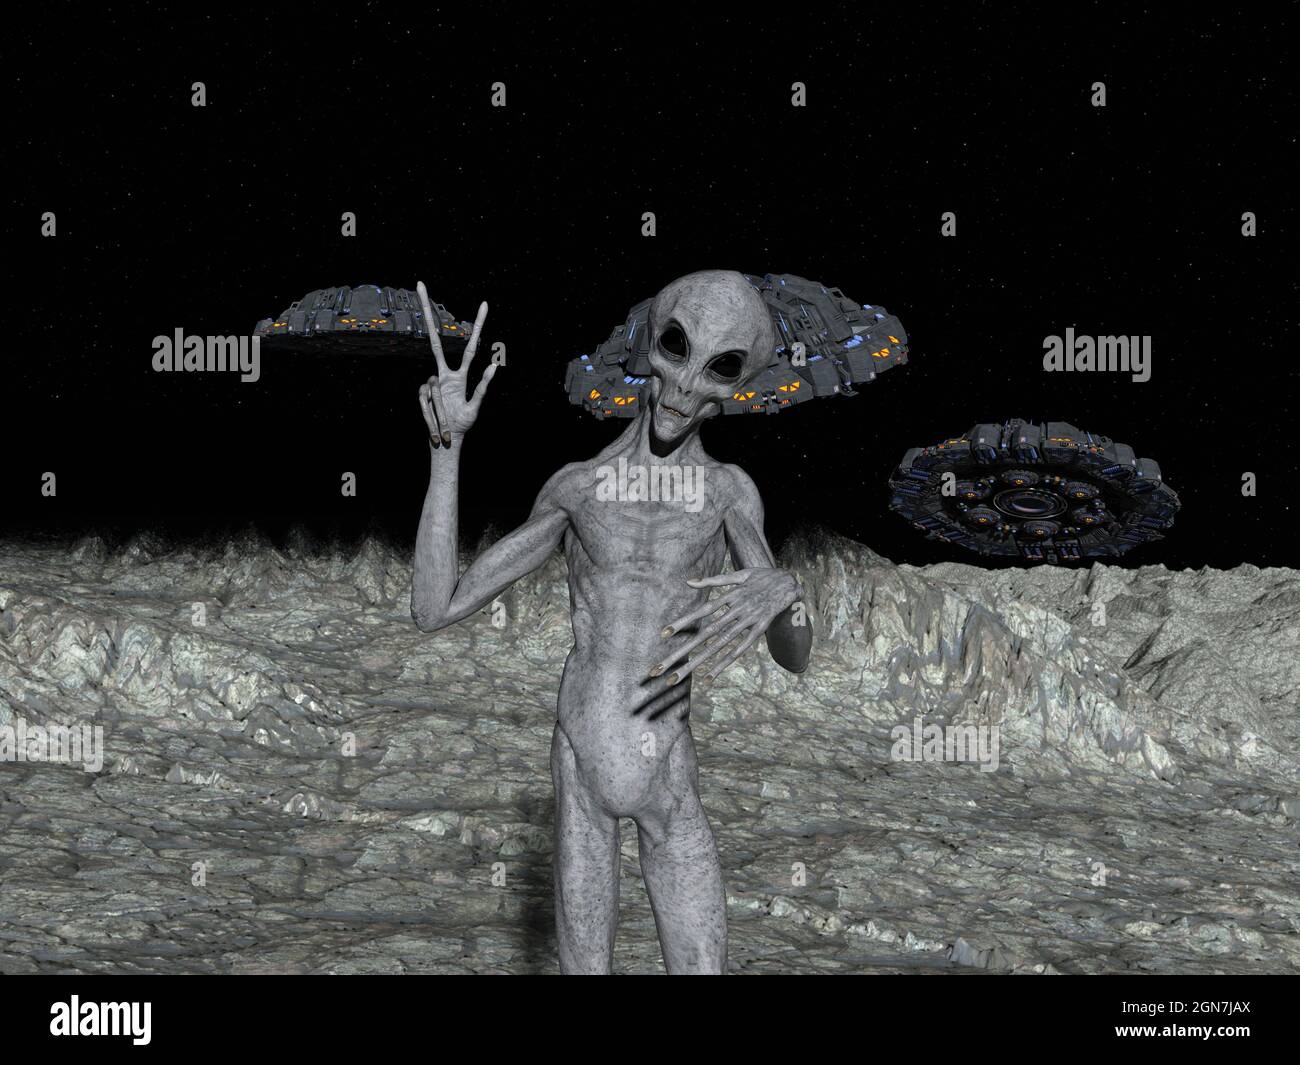 3d illustration of a grey alien showing a peace sign with three UFOs in the background on an airless planet. Stock Photo